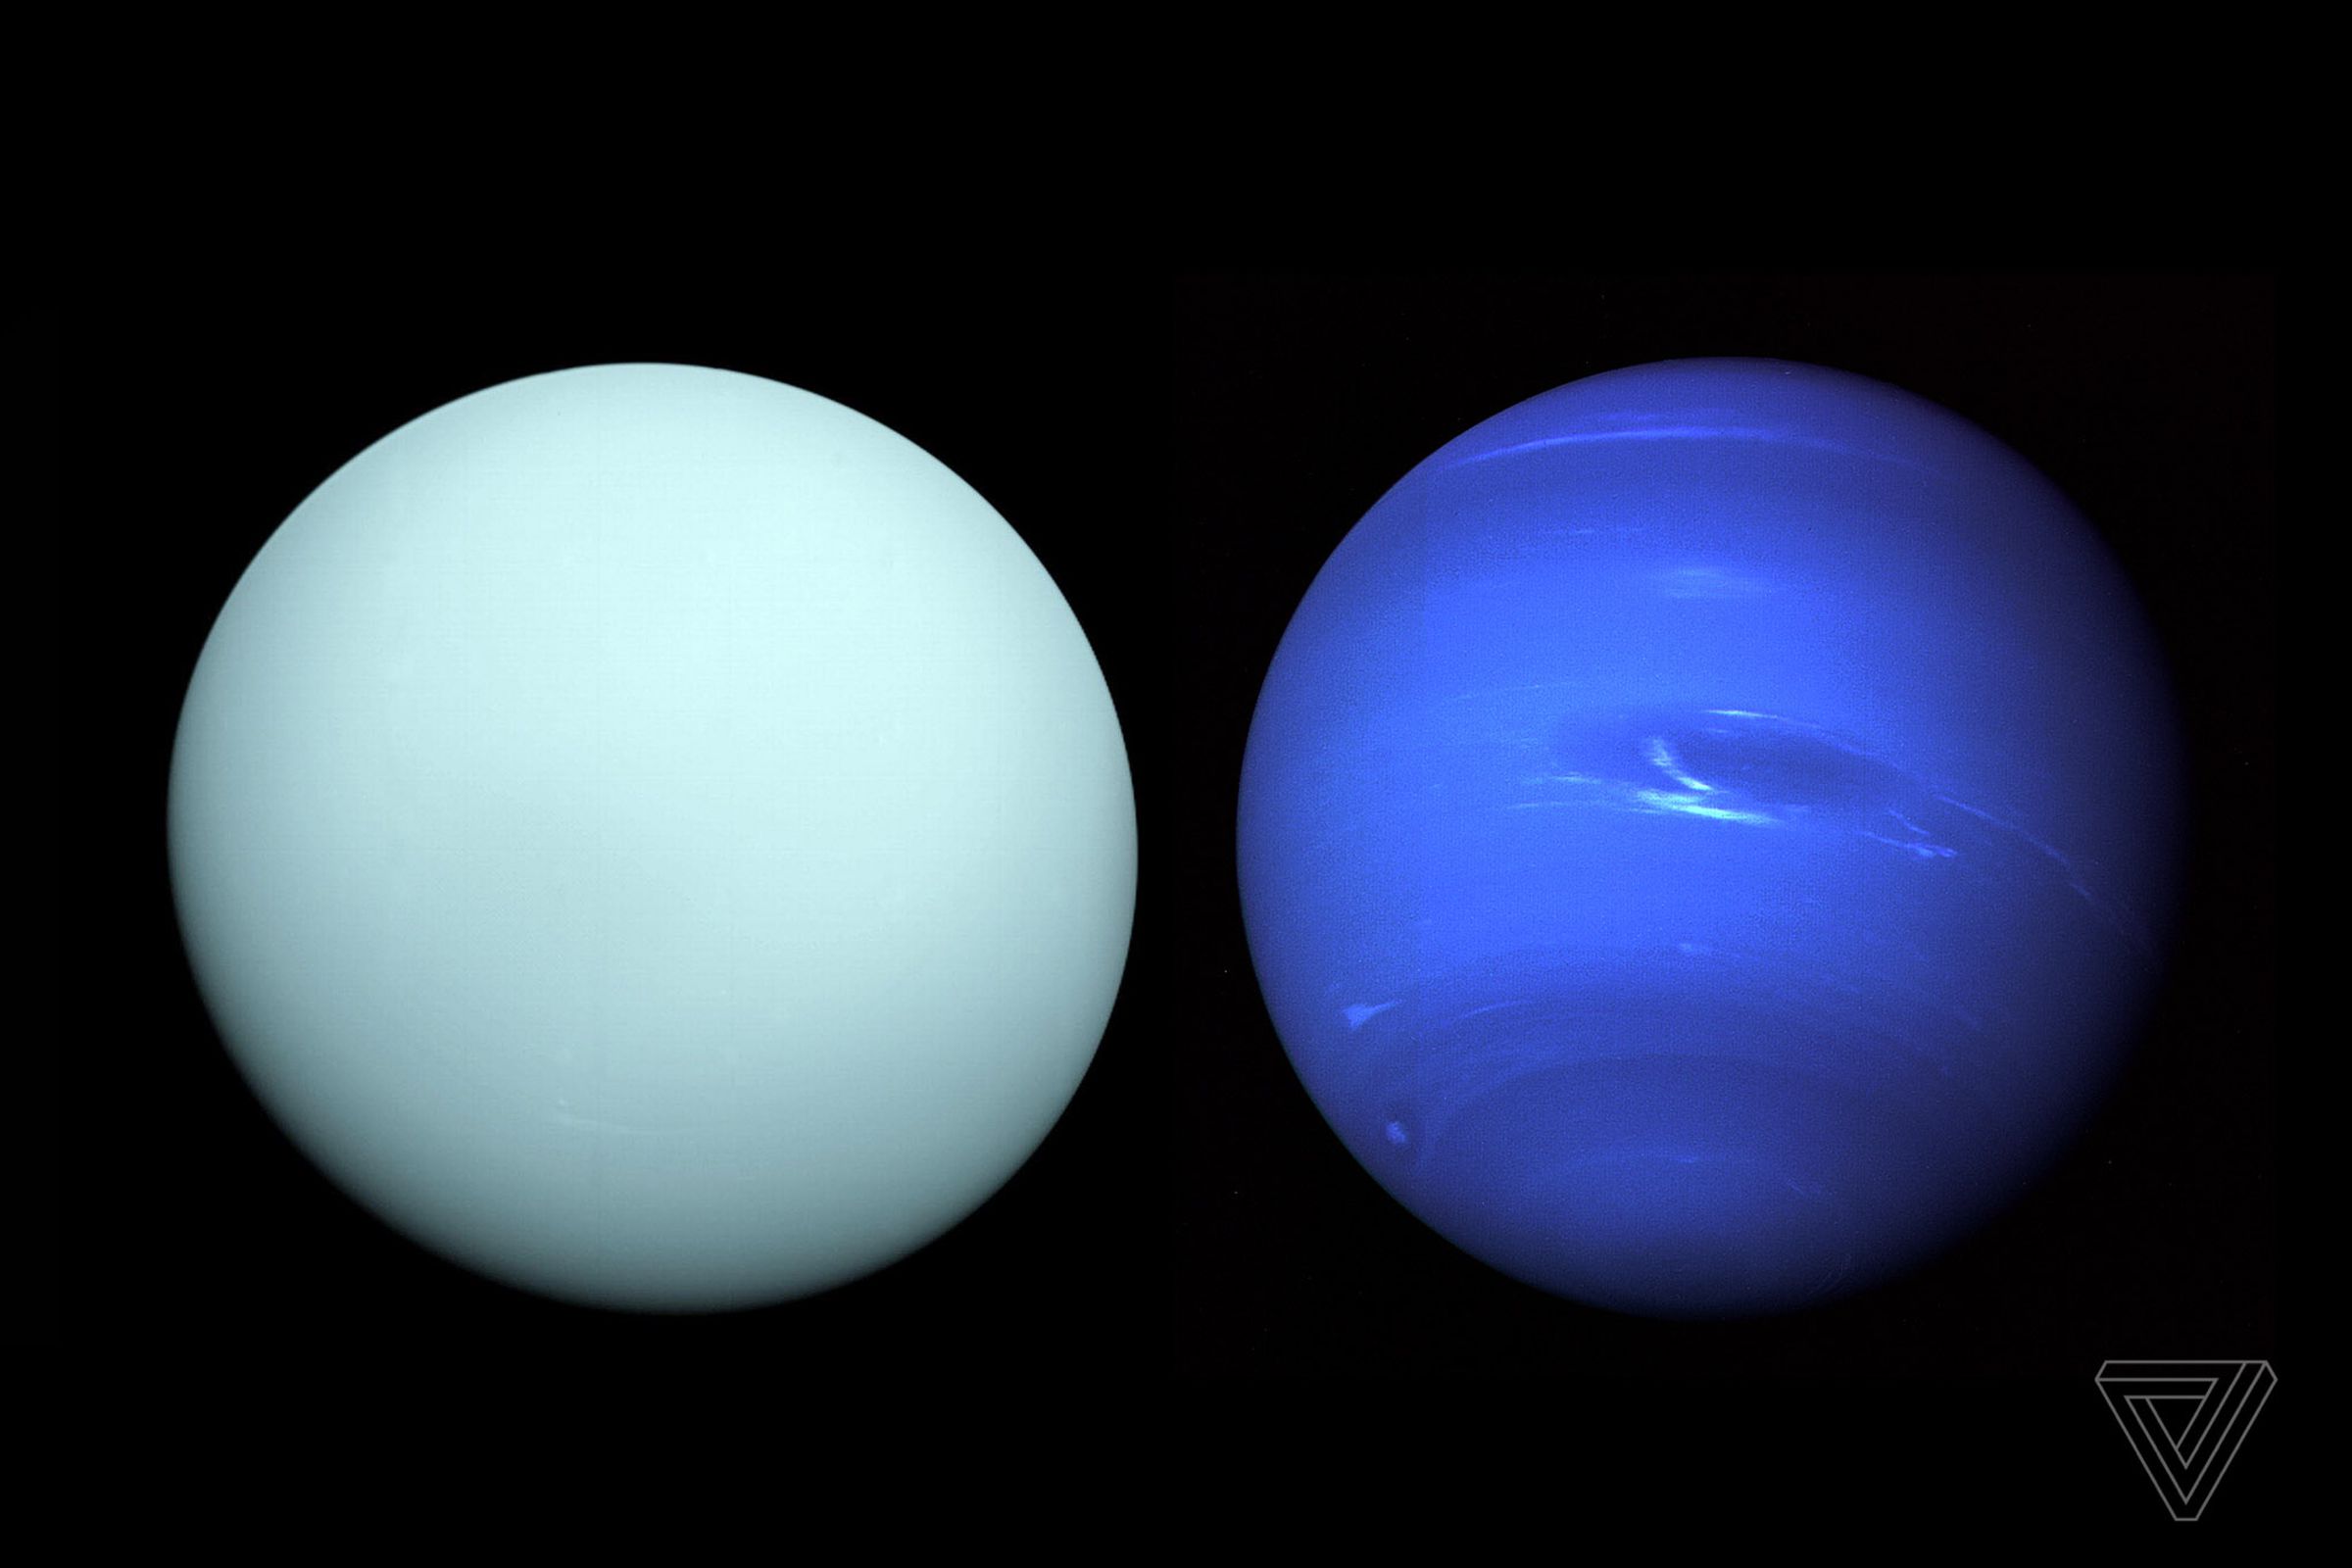 Uranus (L) and Neptune (R) as seen from Voyager 2.